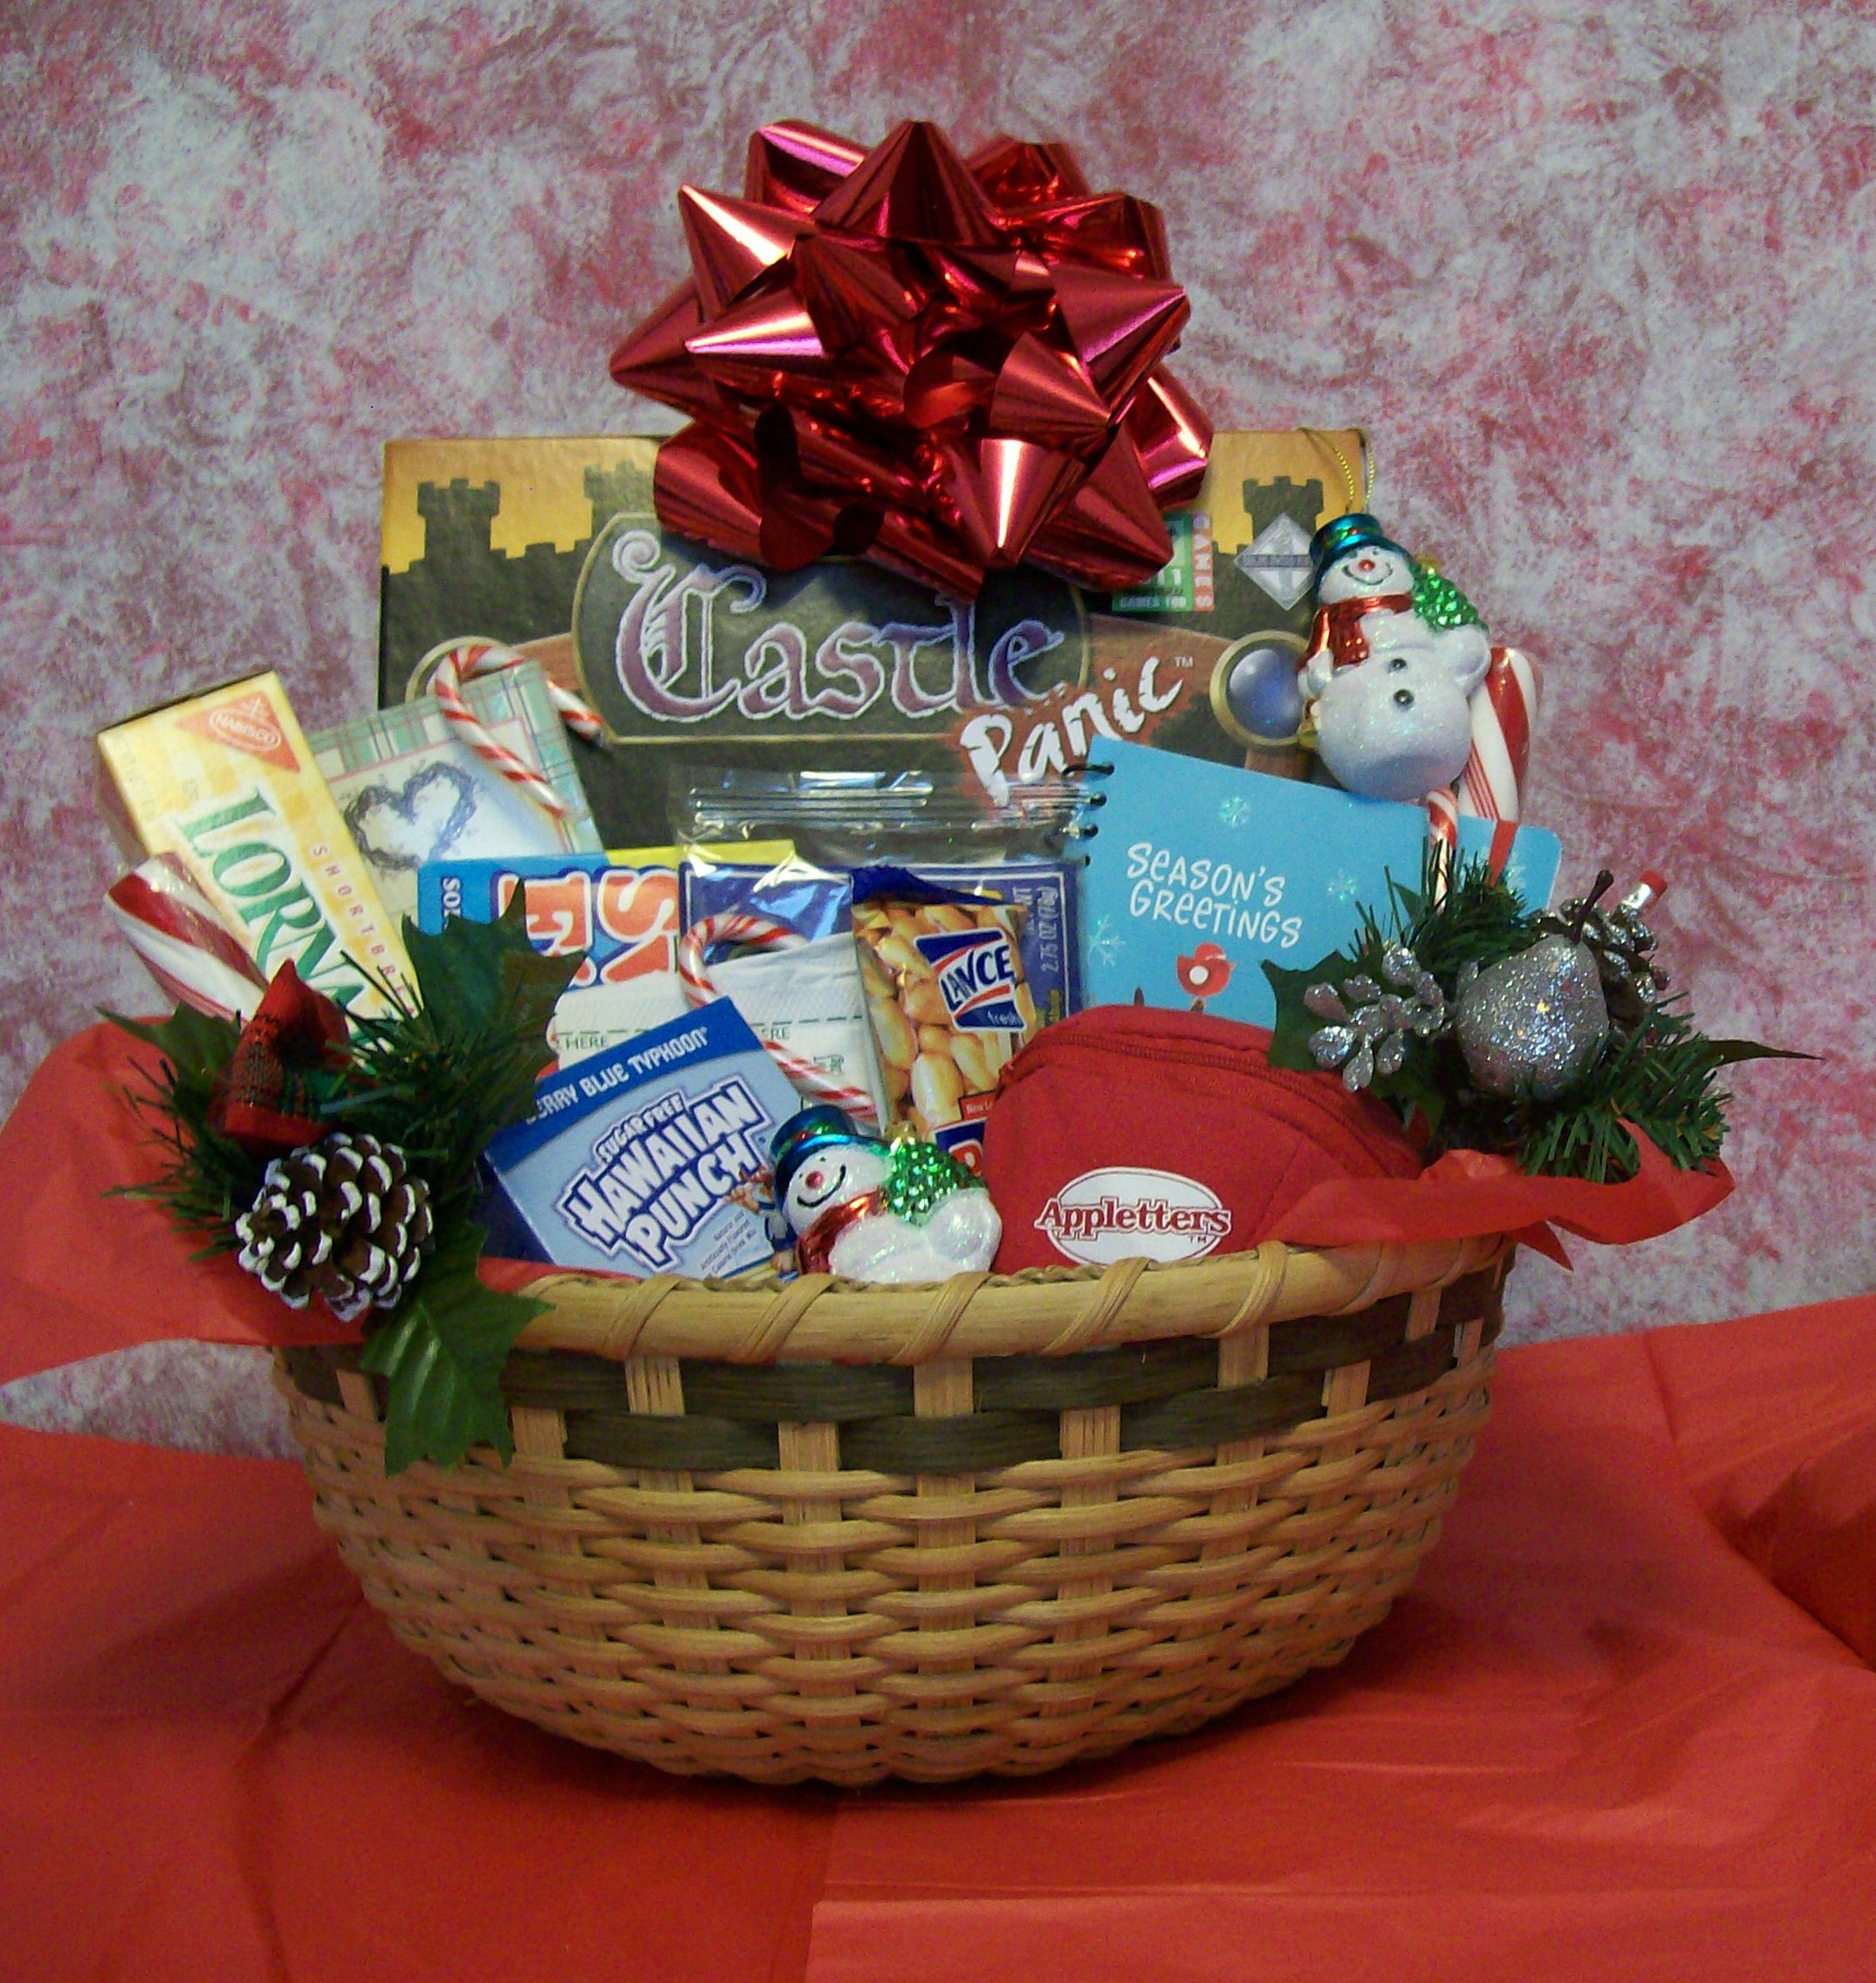 Gift Basket Ideas Christmas
 Create a Christmas Fun and Games Gift Basket for a Family